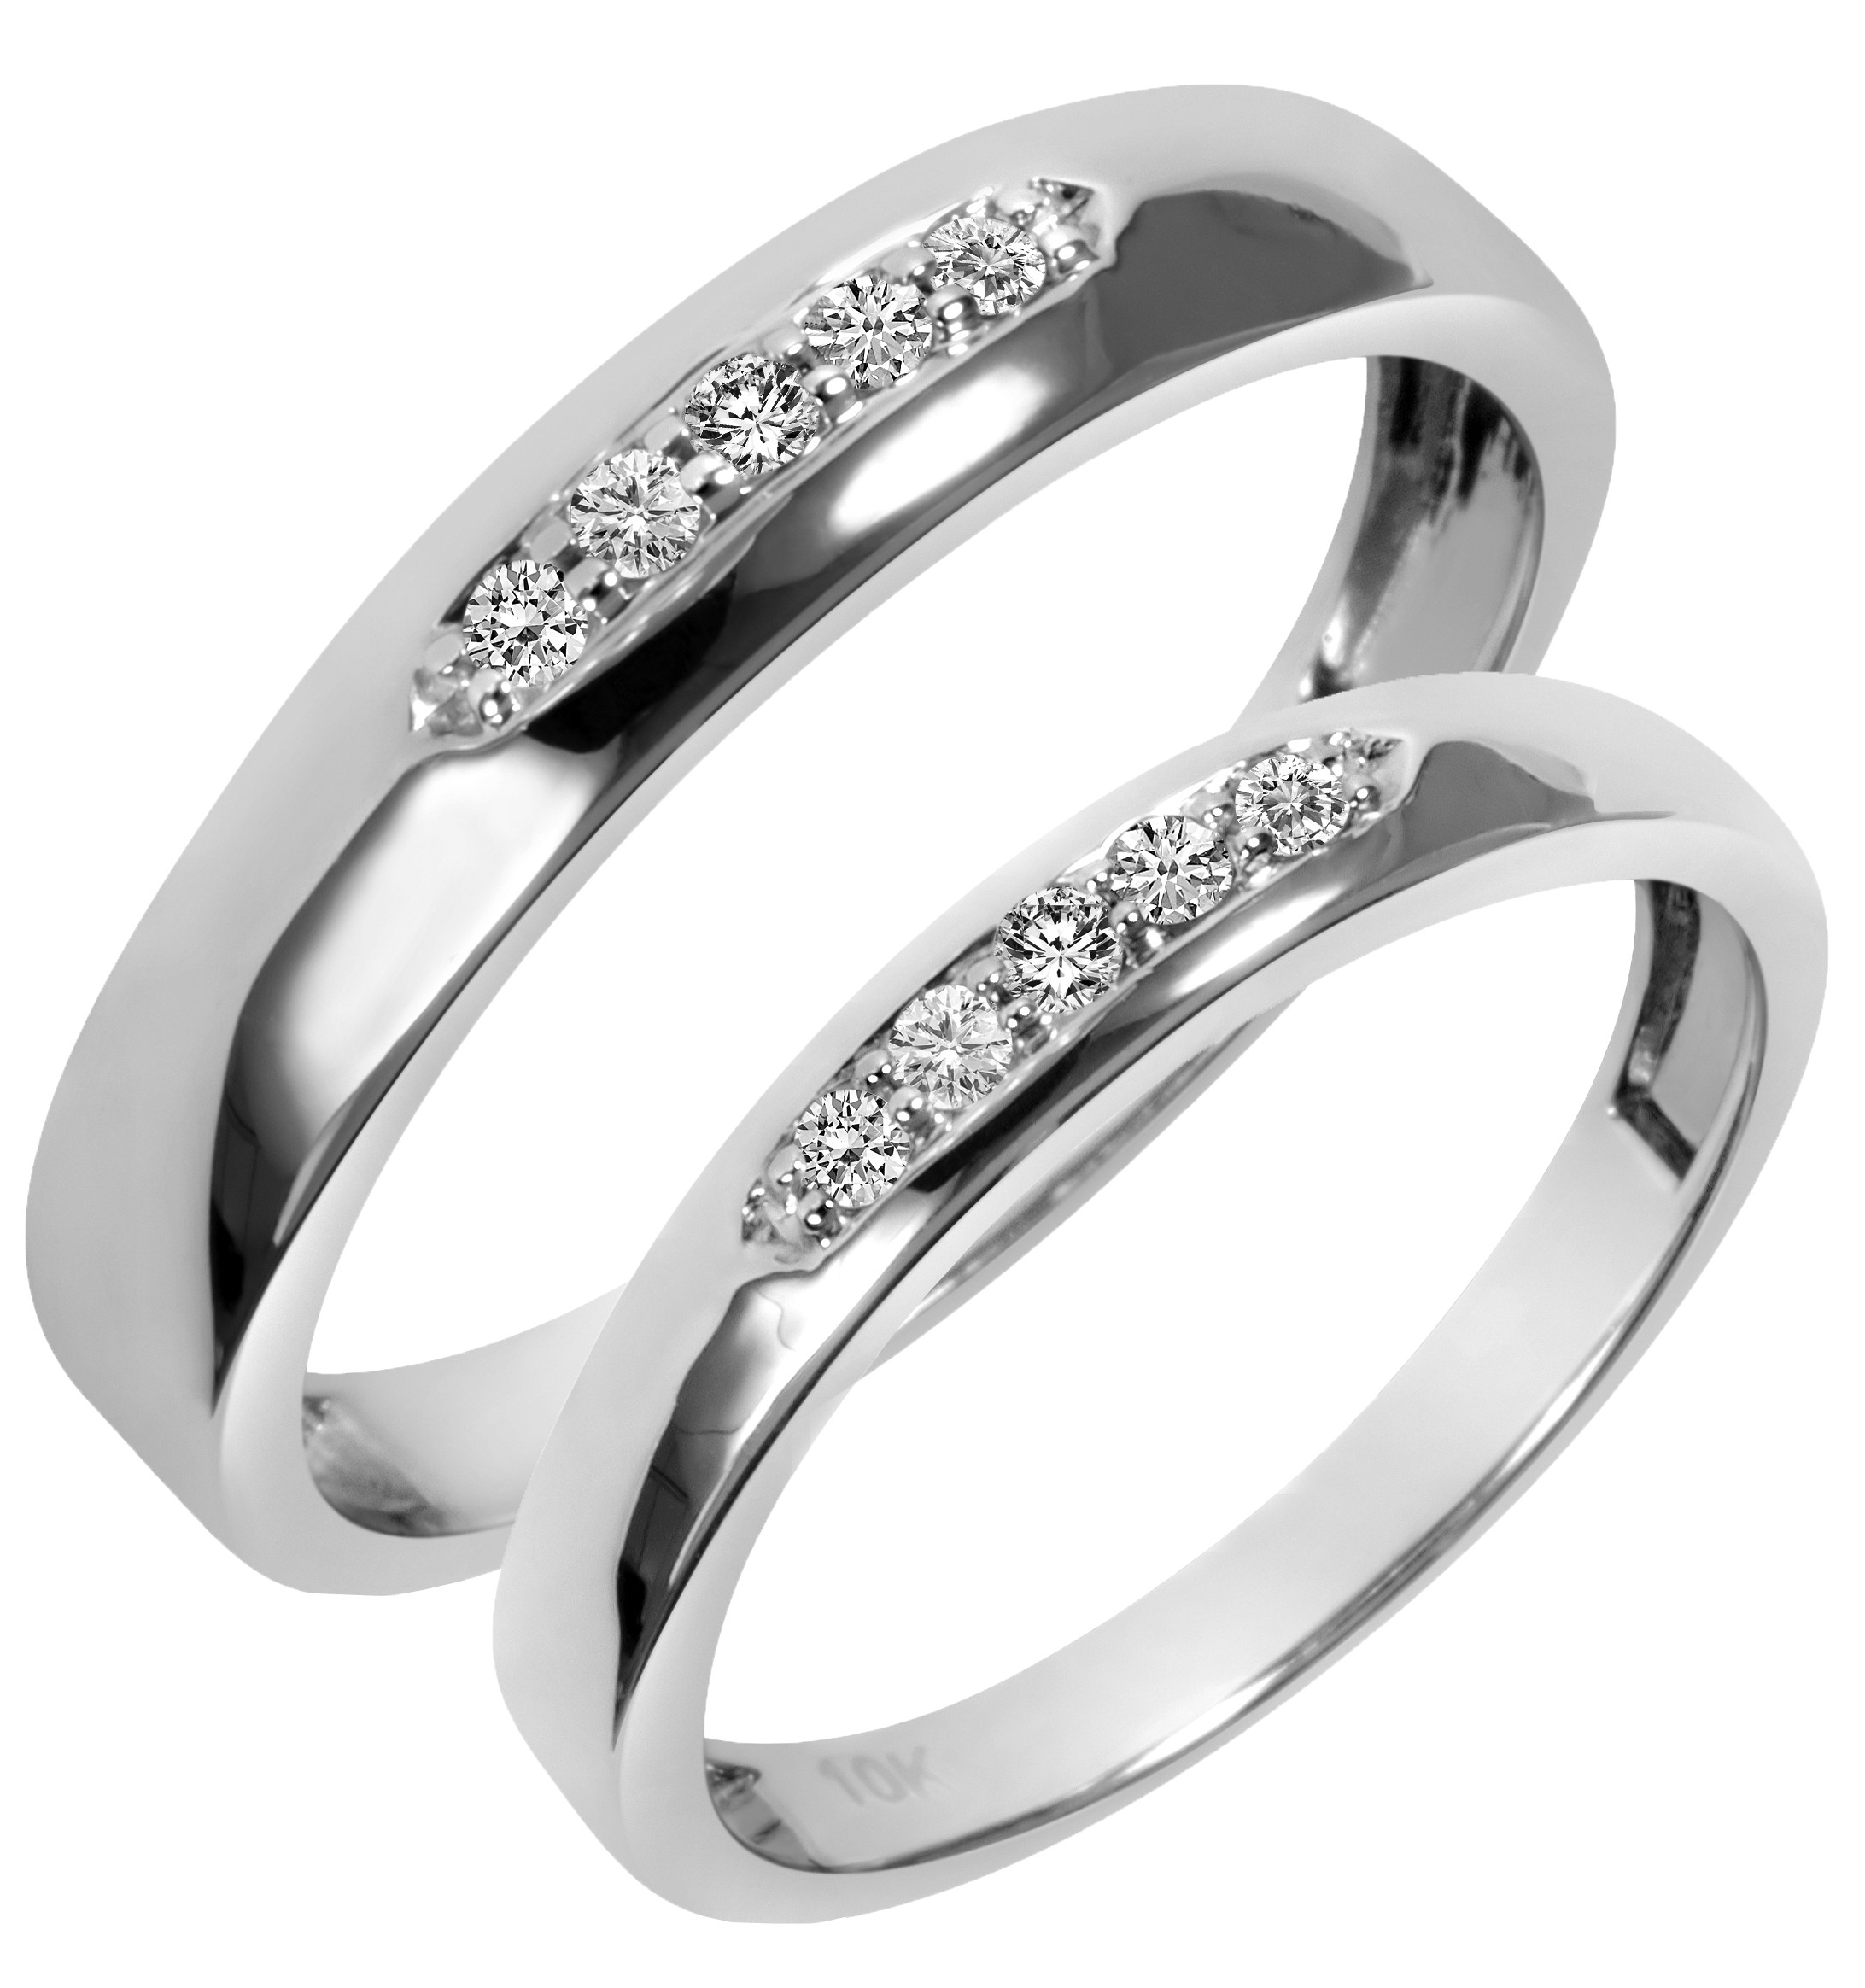 White Gold Wedding Rings
 White Gold Wedding Ring Sets His And Hers